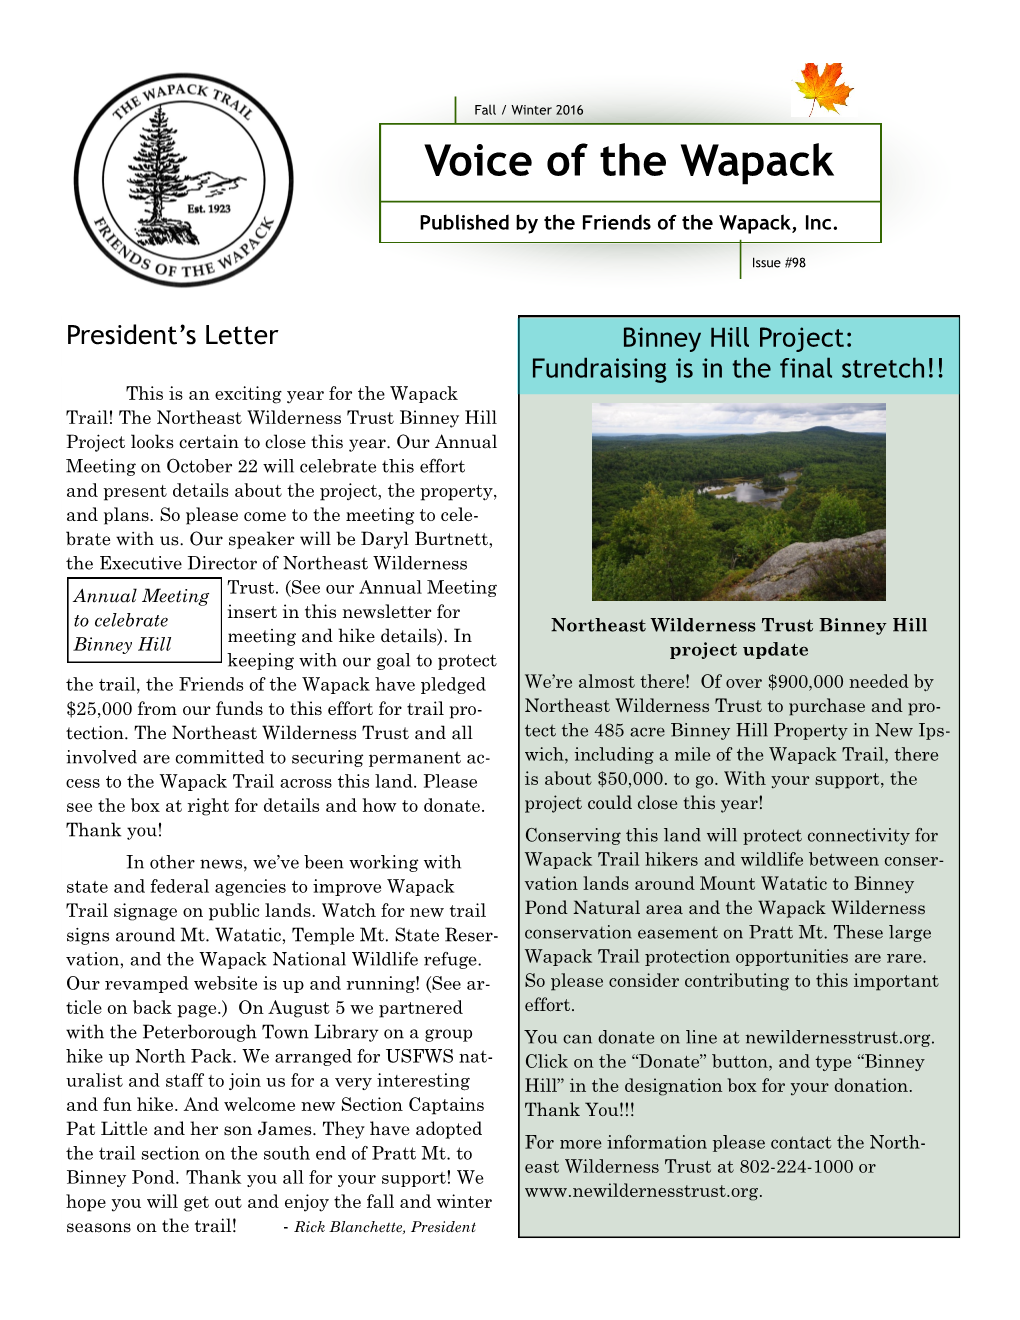 2016 Fall Voice of the Wapack